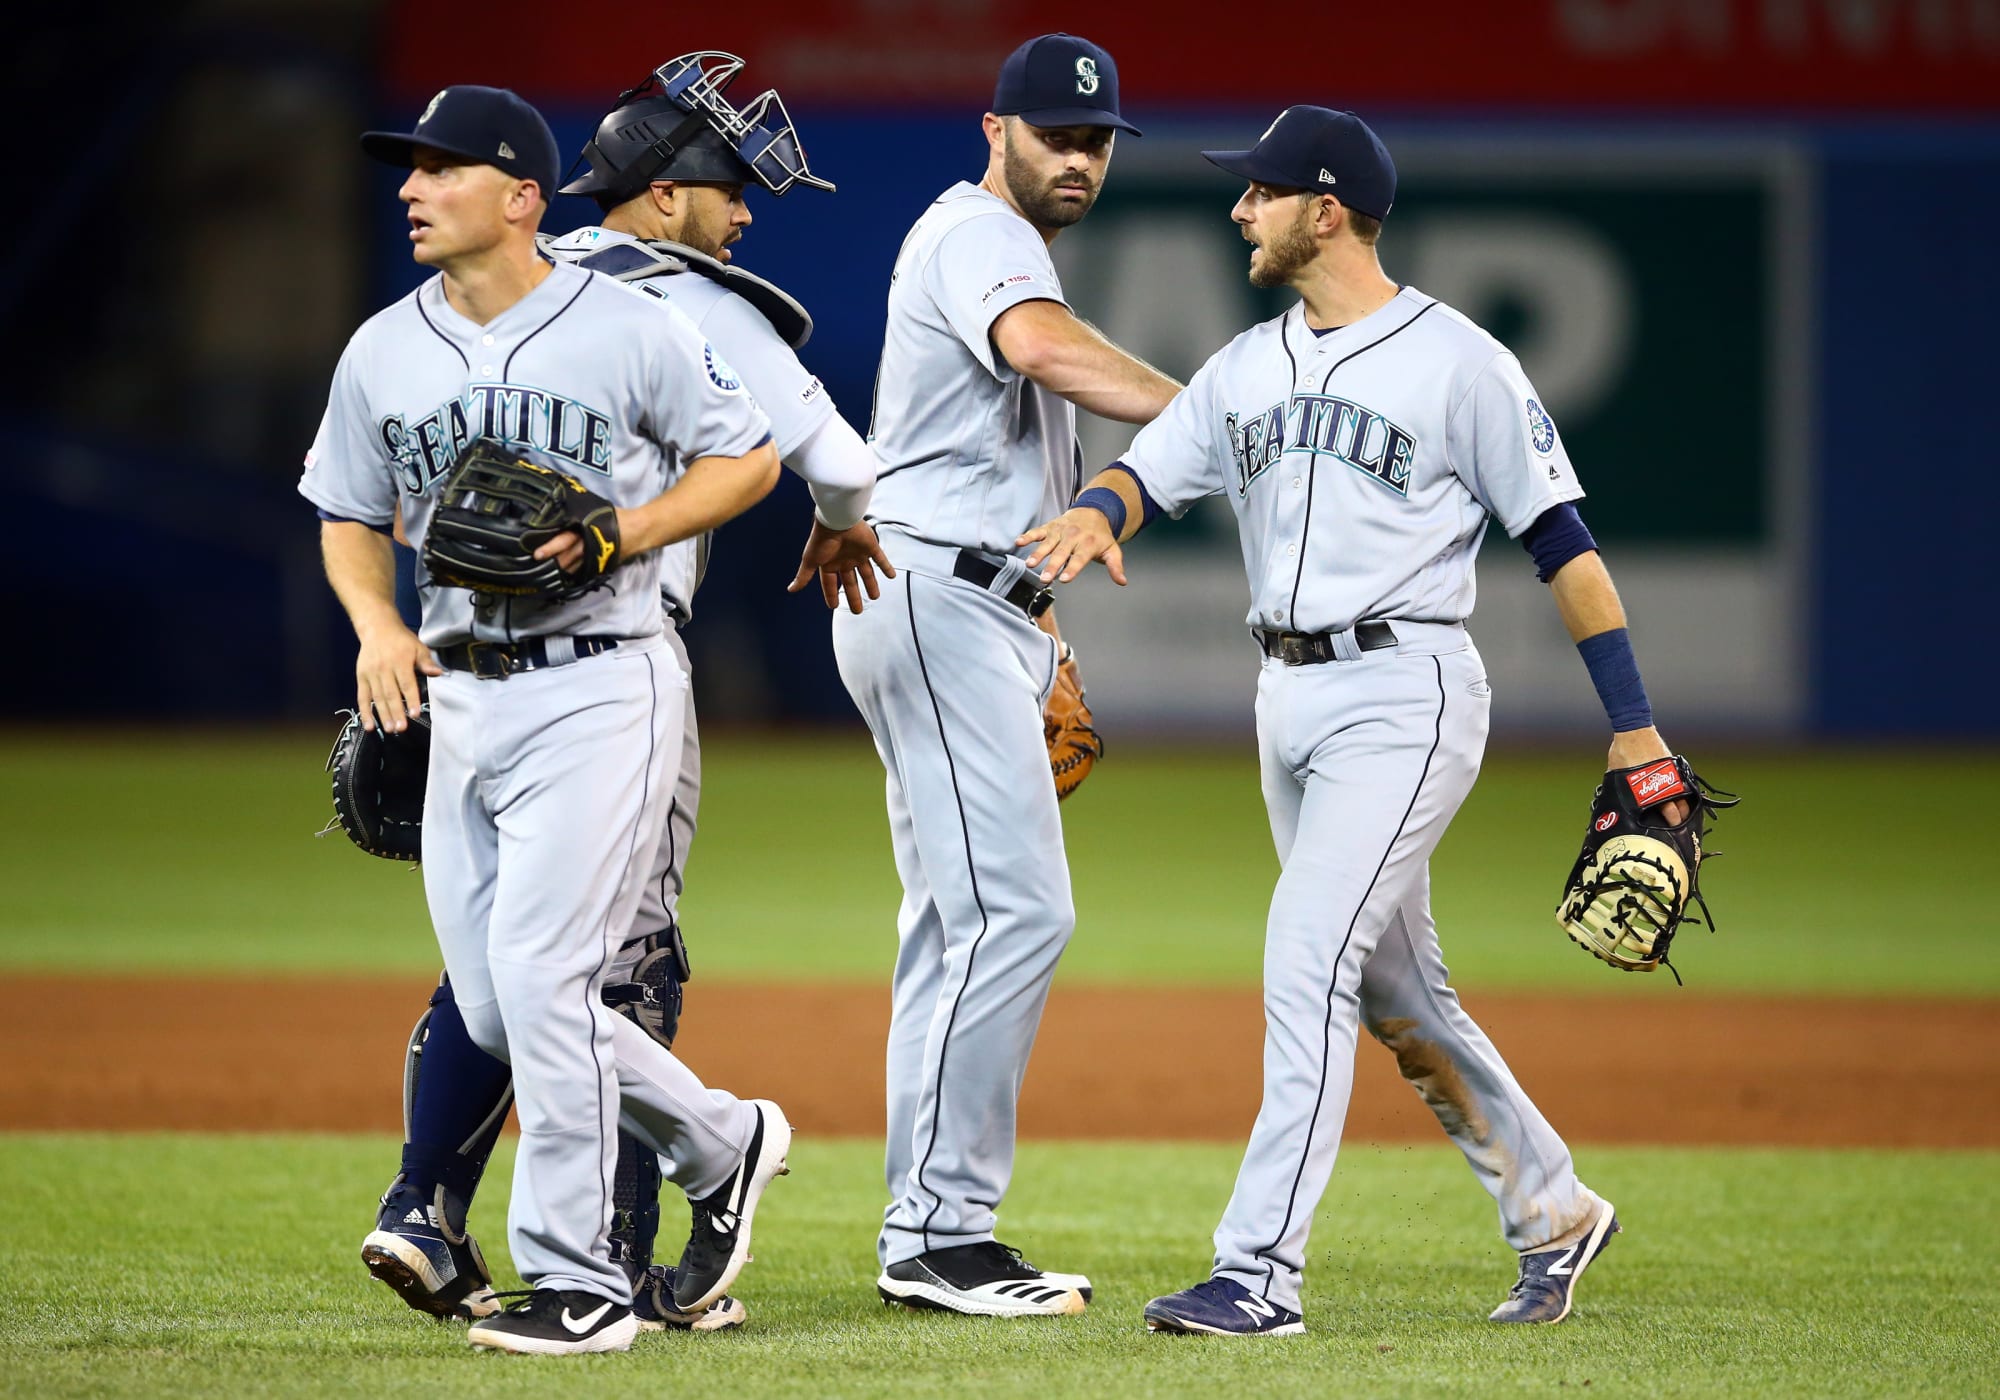 This Week’s Look how the Seattle Mariners bullpen shapes up